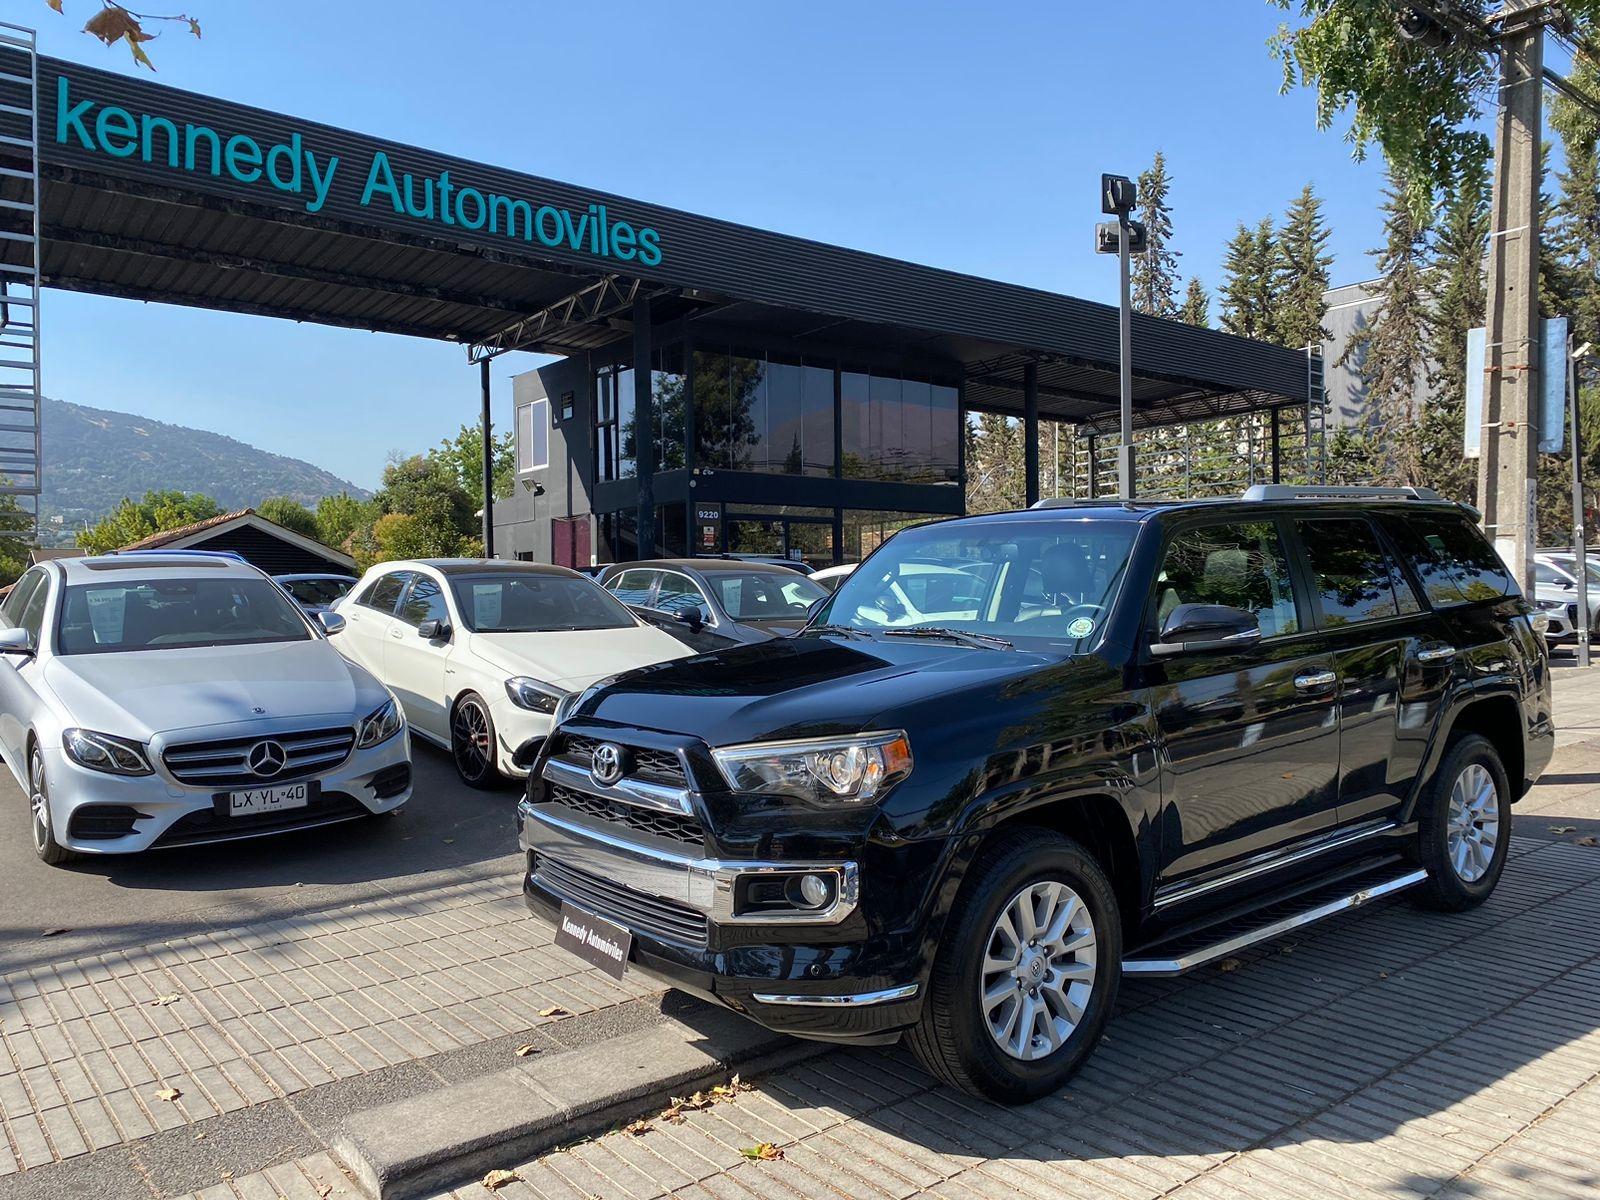 TOYOTA 4 RUNNER 4.0 Limited Auto 2015 Impecable - KENNEDY AUTOMOVILES